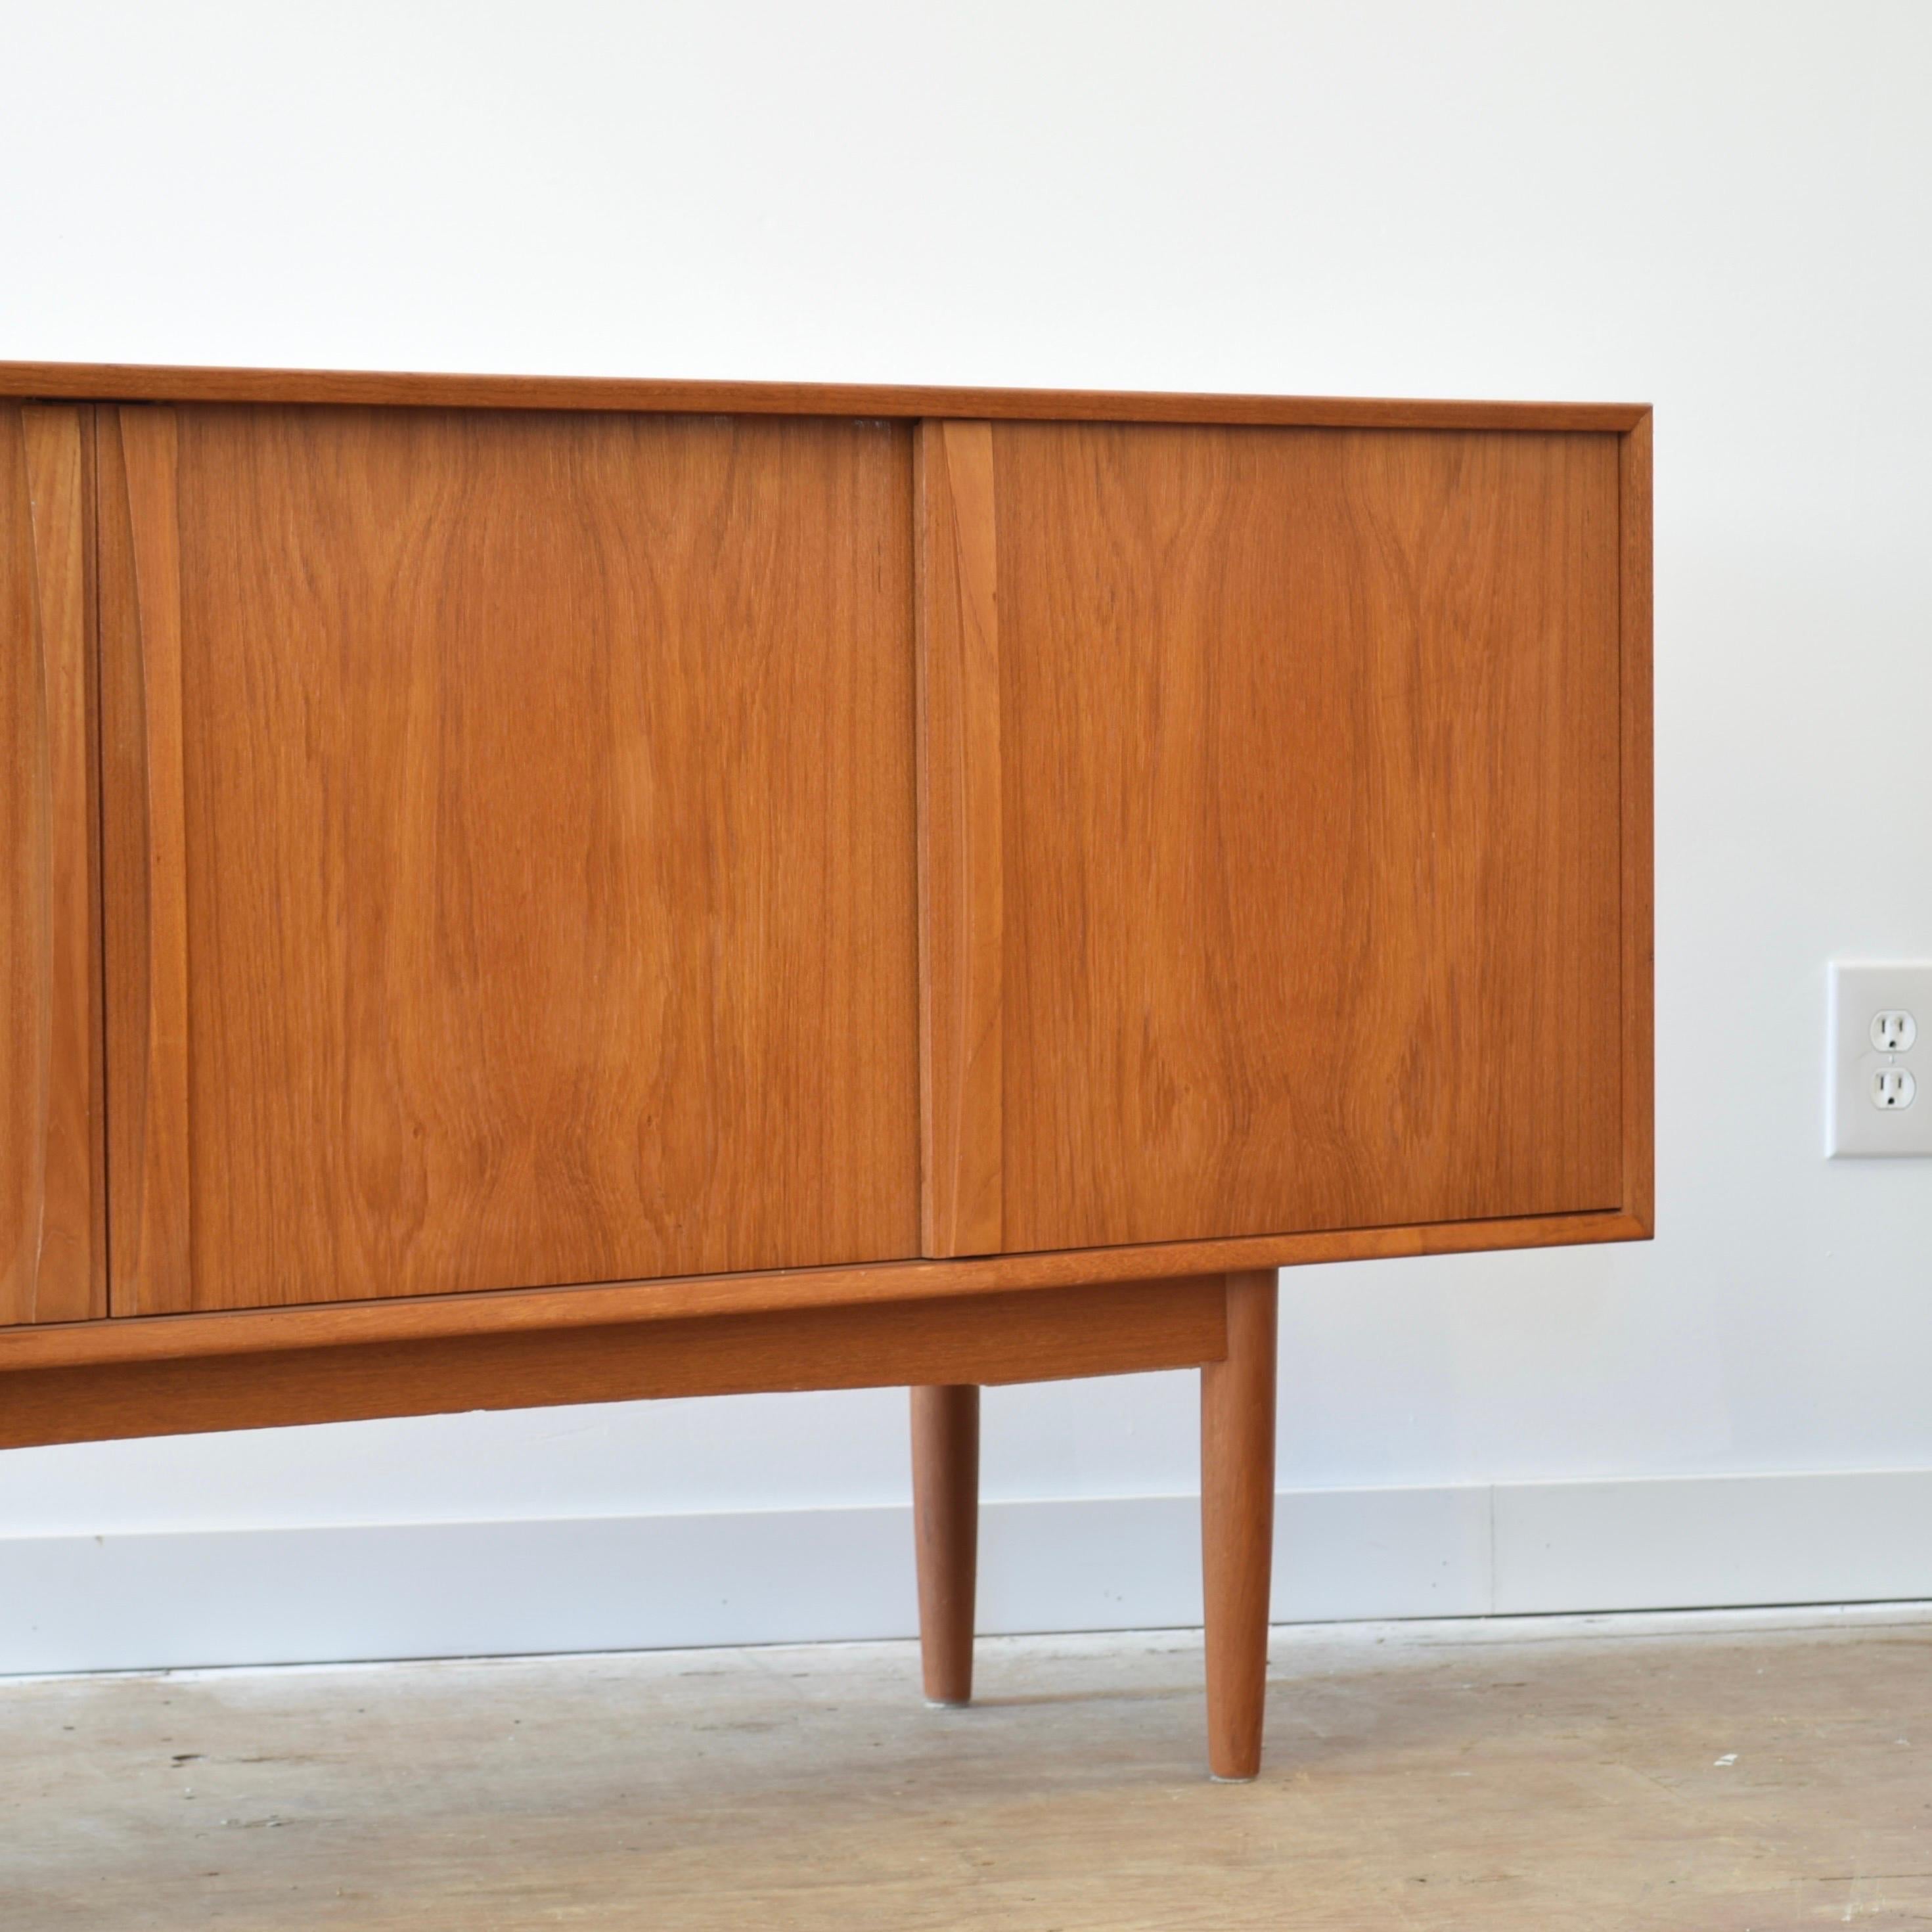 Condition: Great Vintage Condition

Dimensions: 76.75” L x 15.75” D x 31” H

Description: A vintage Danish teak sideboard. Made in Denmark by STM Møbler, circa 1960s. Shelves are adjustable. Drawers and doors slide easily and fully. A few minor